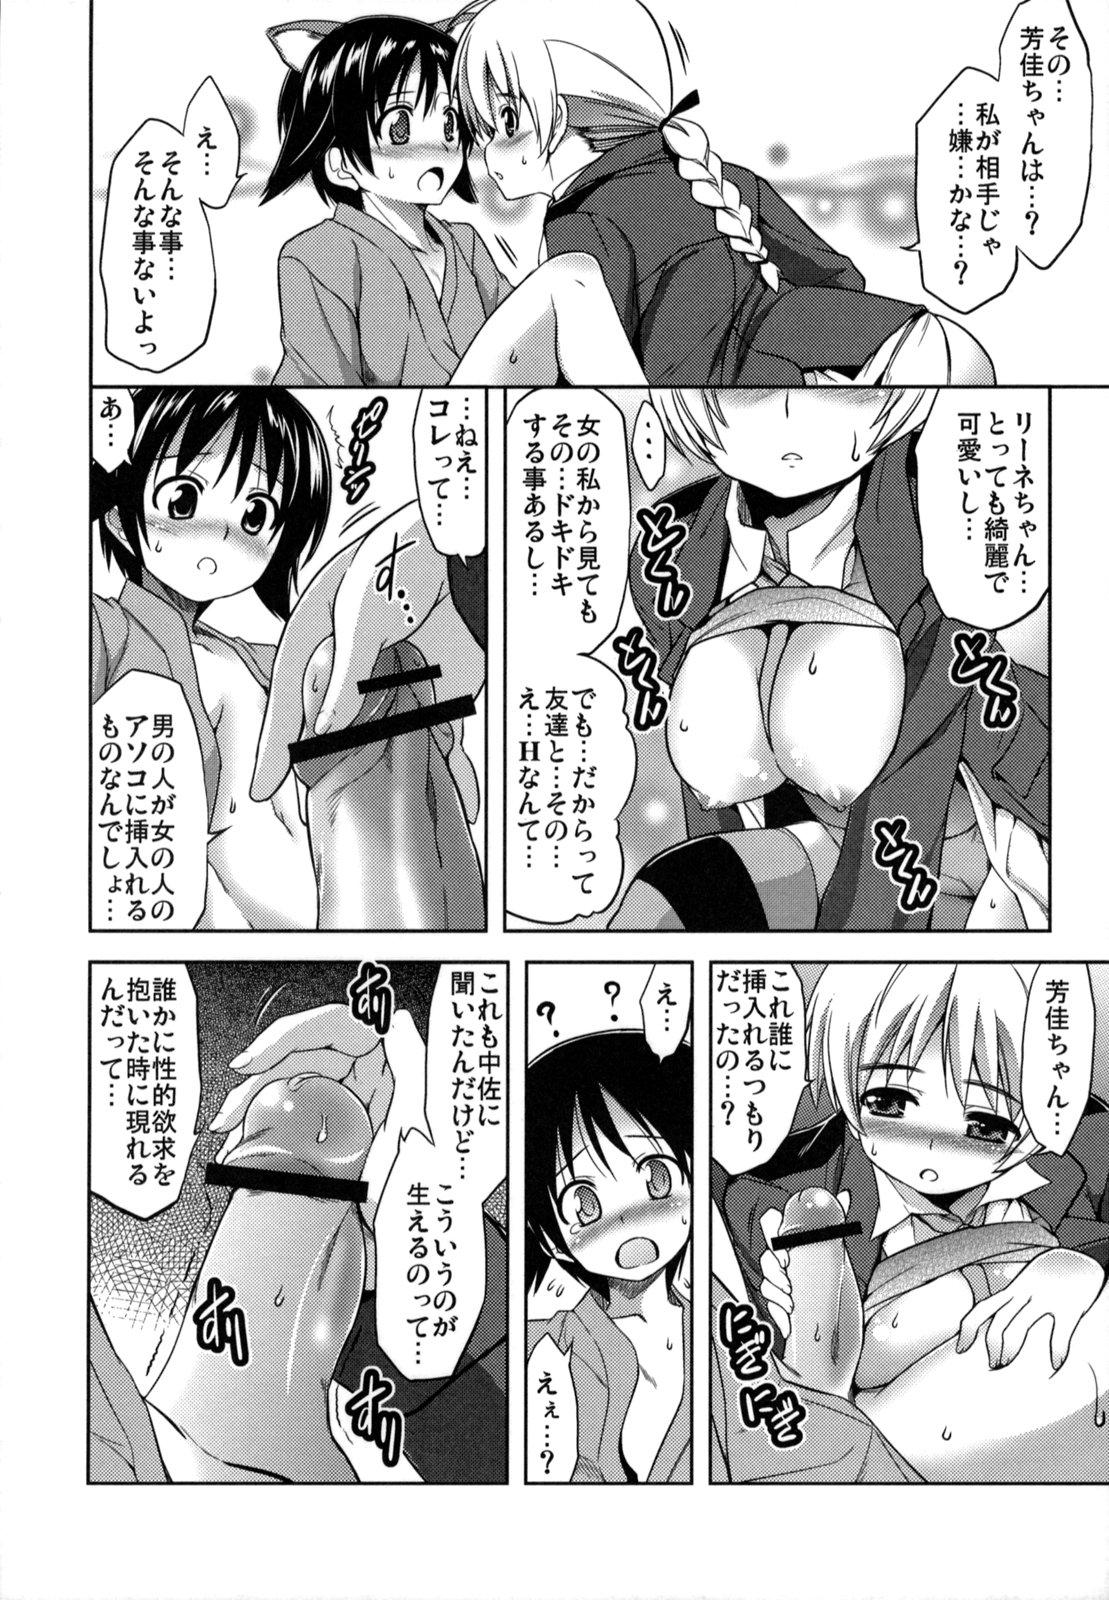 Pija GL WITCHES - Strike witches Bbc - Page 5